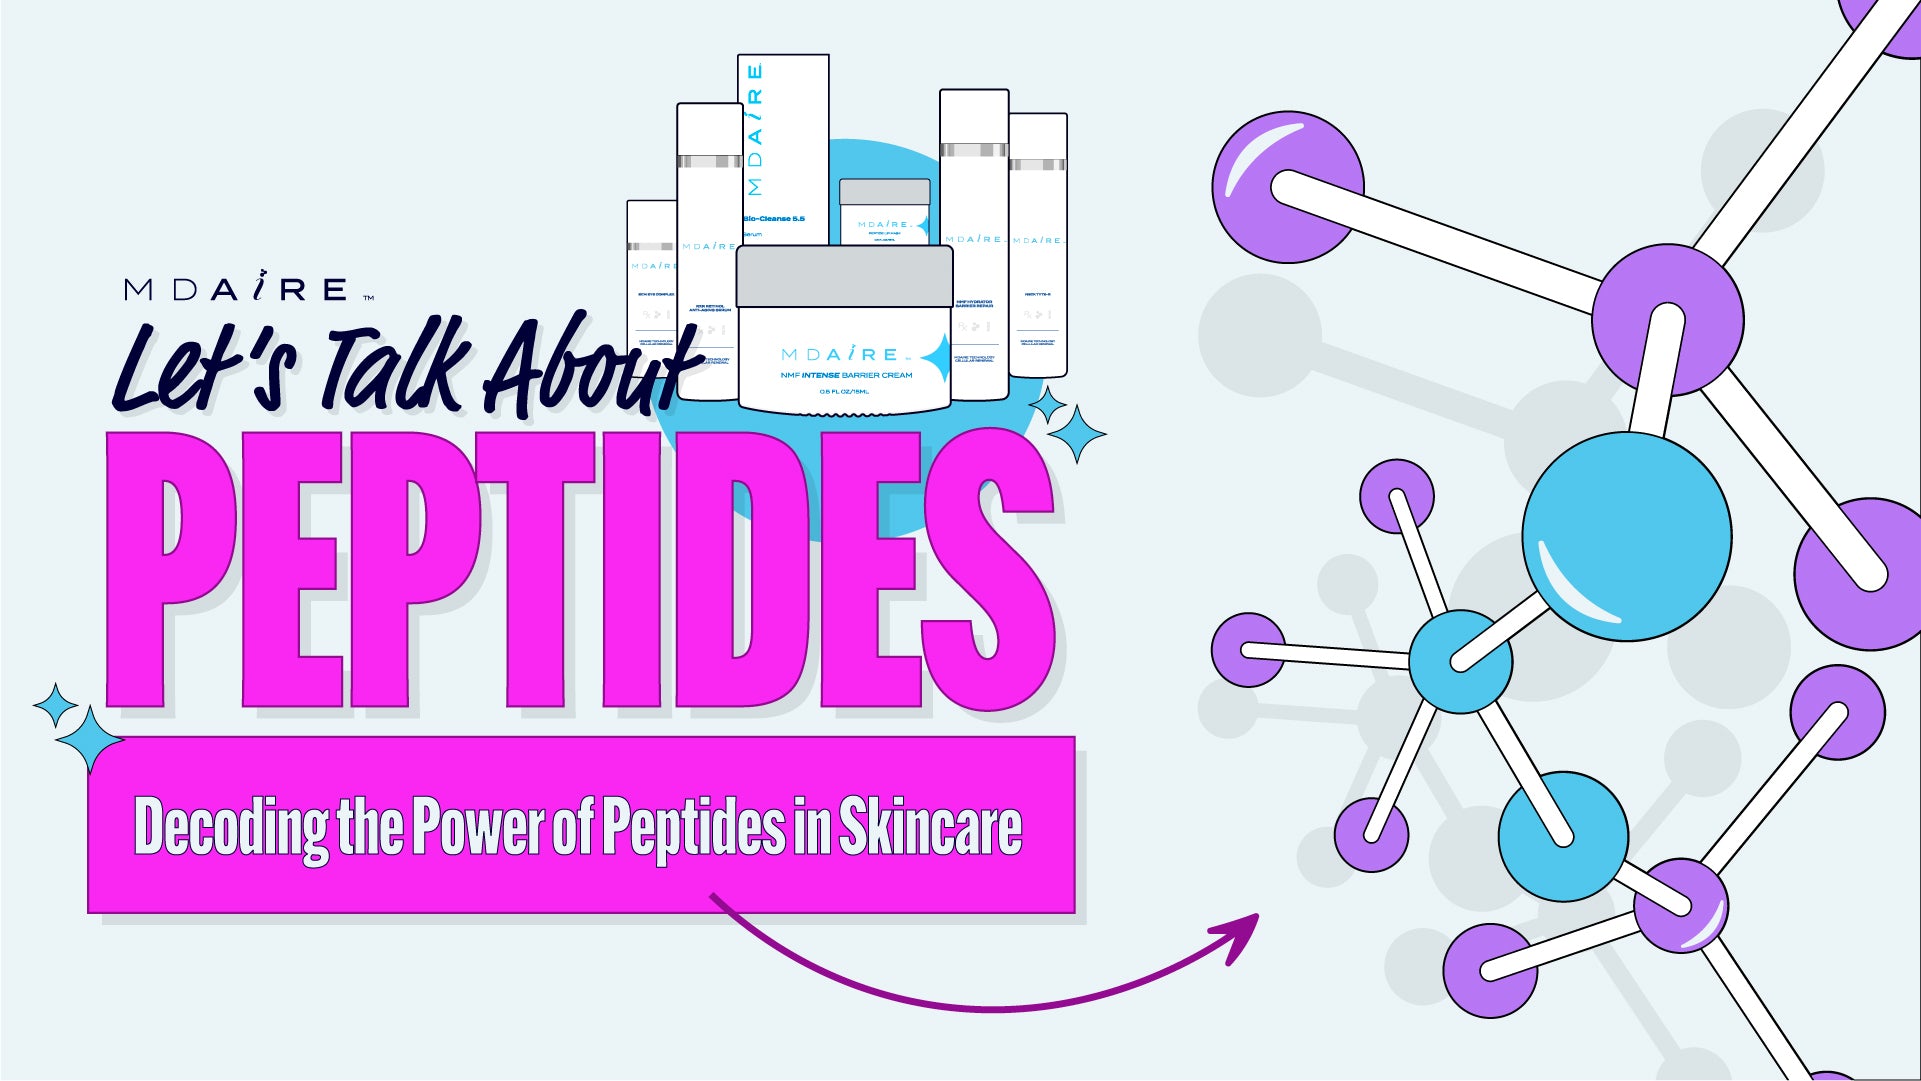 Decoding the Power of Peptides in Skincare